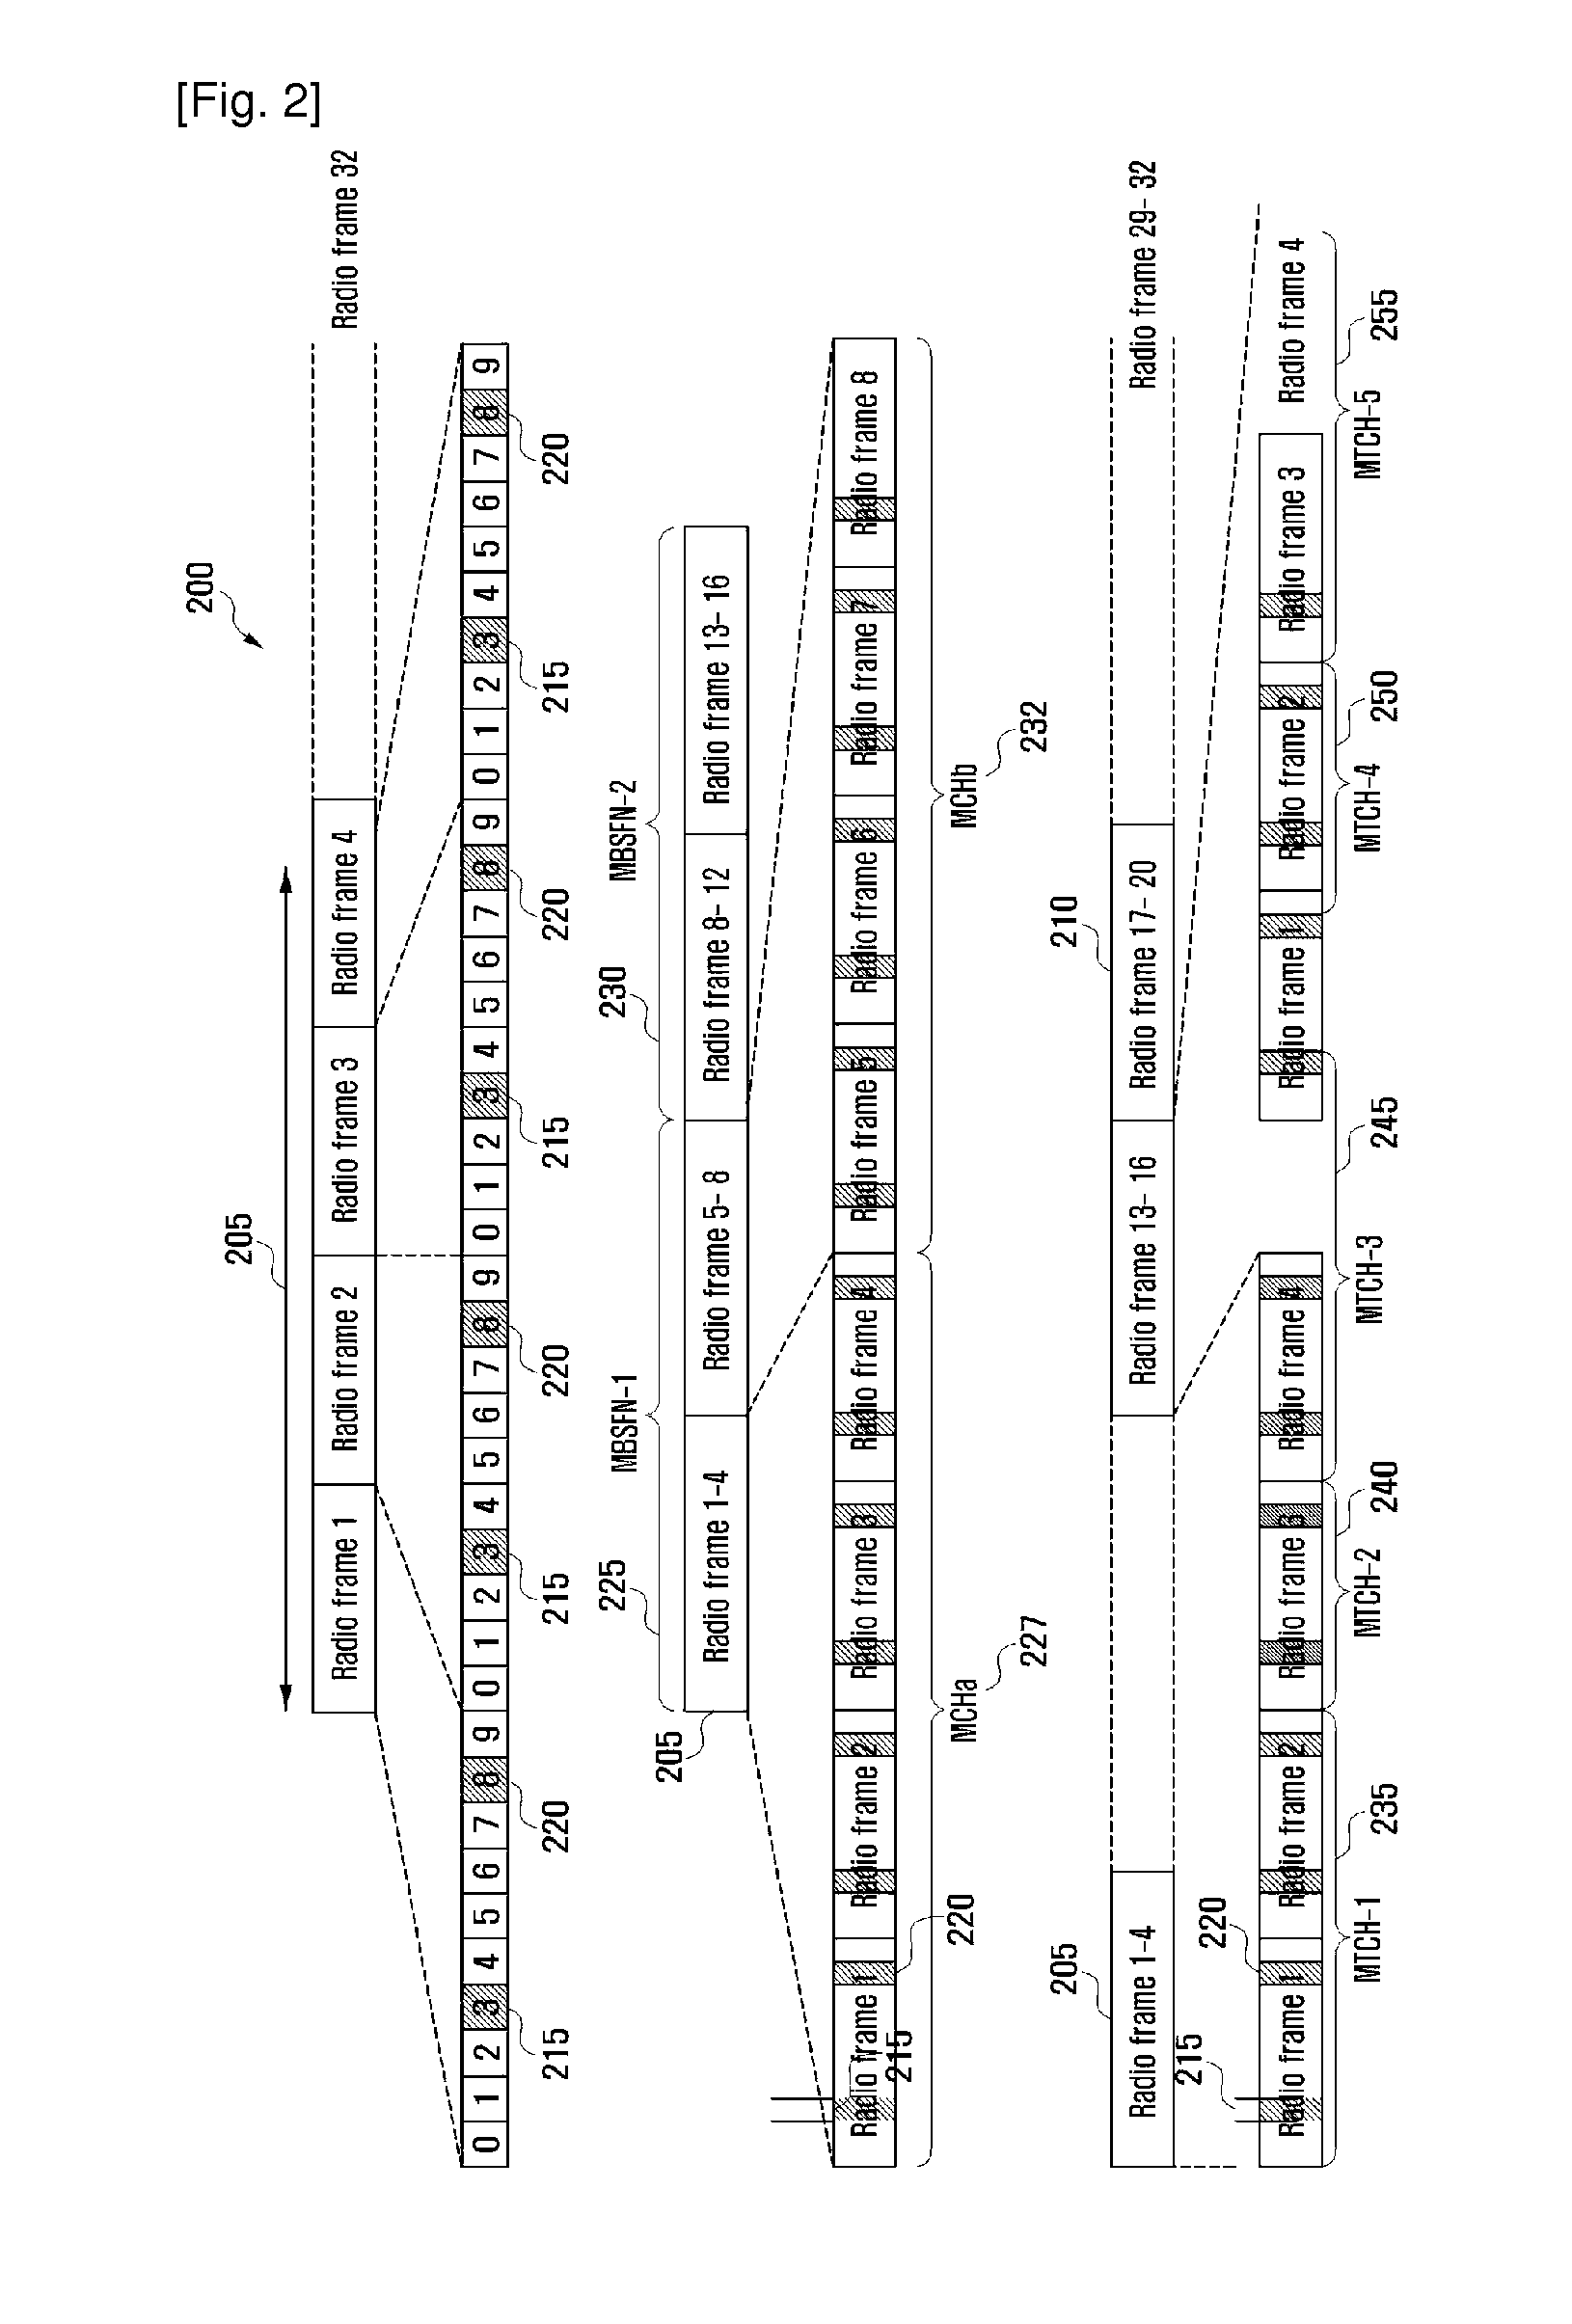 Network element, wireless communication units and methods for scheduling communications